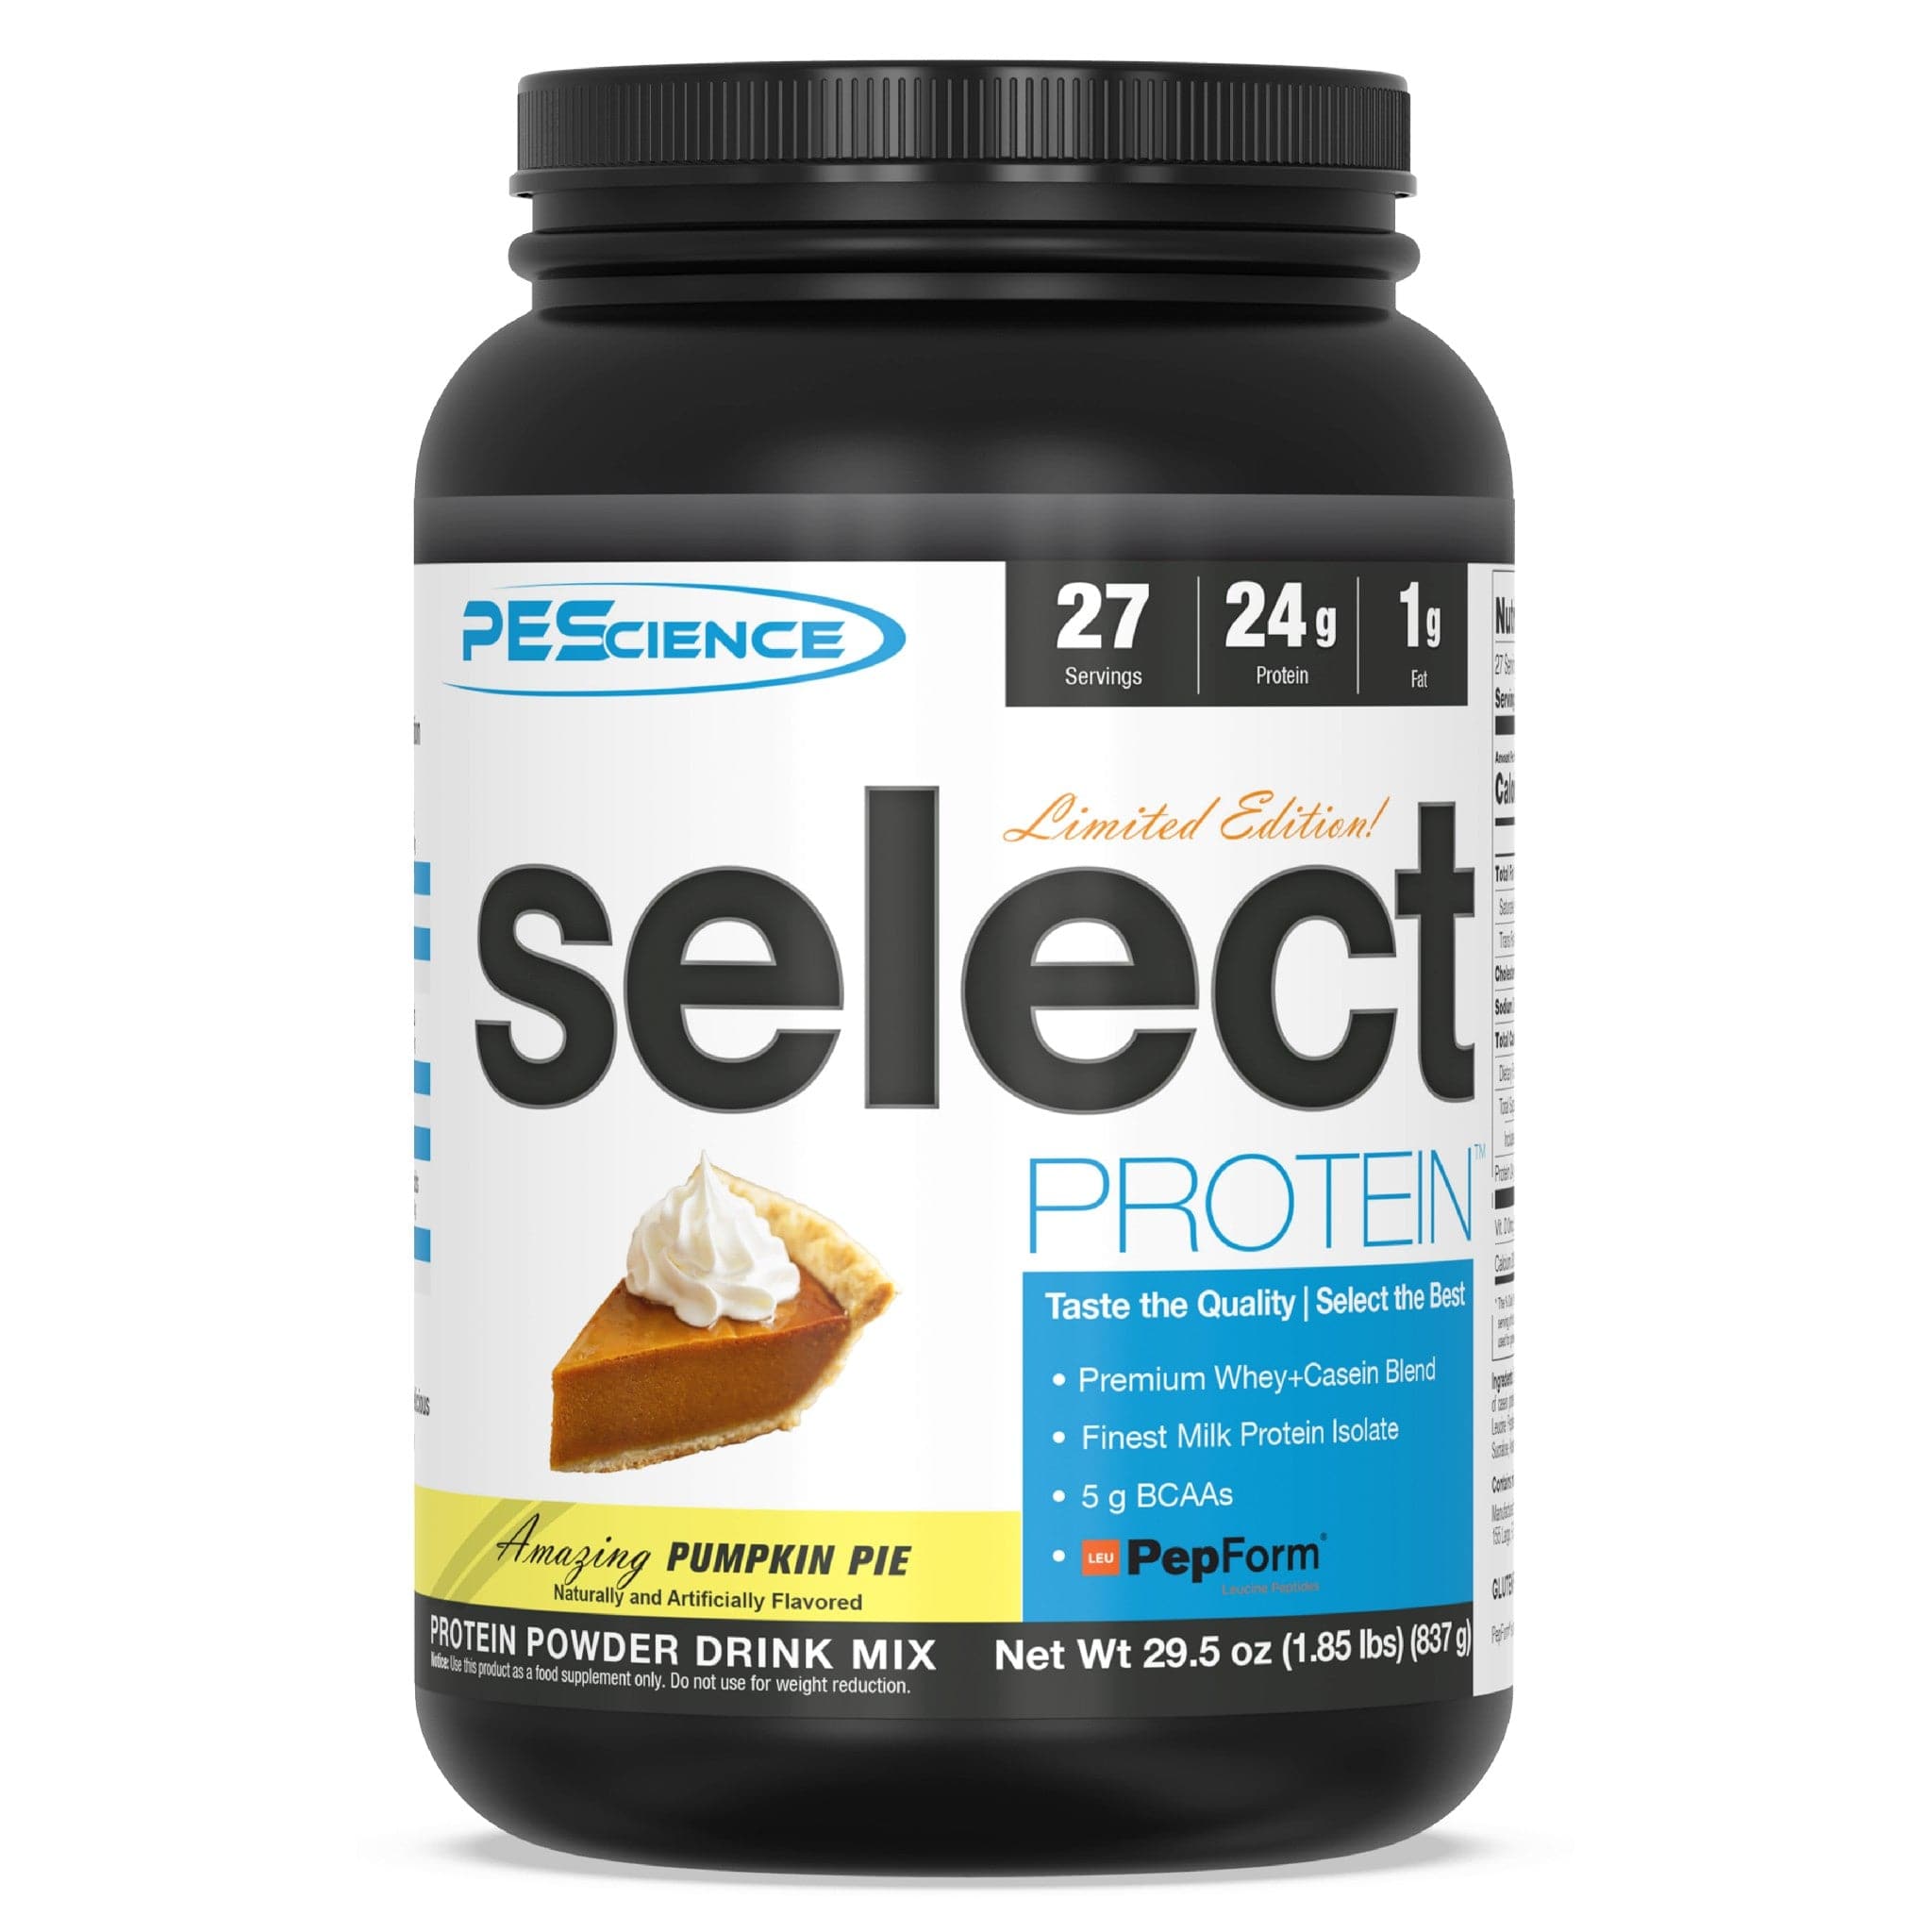 PEScience Select Protein 27 portions